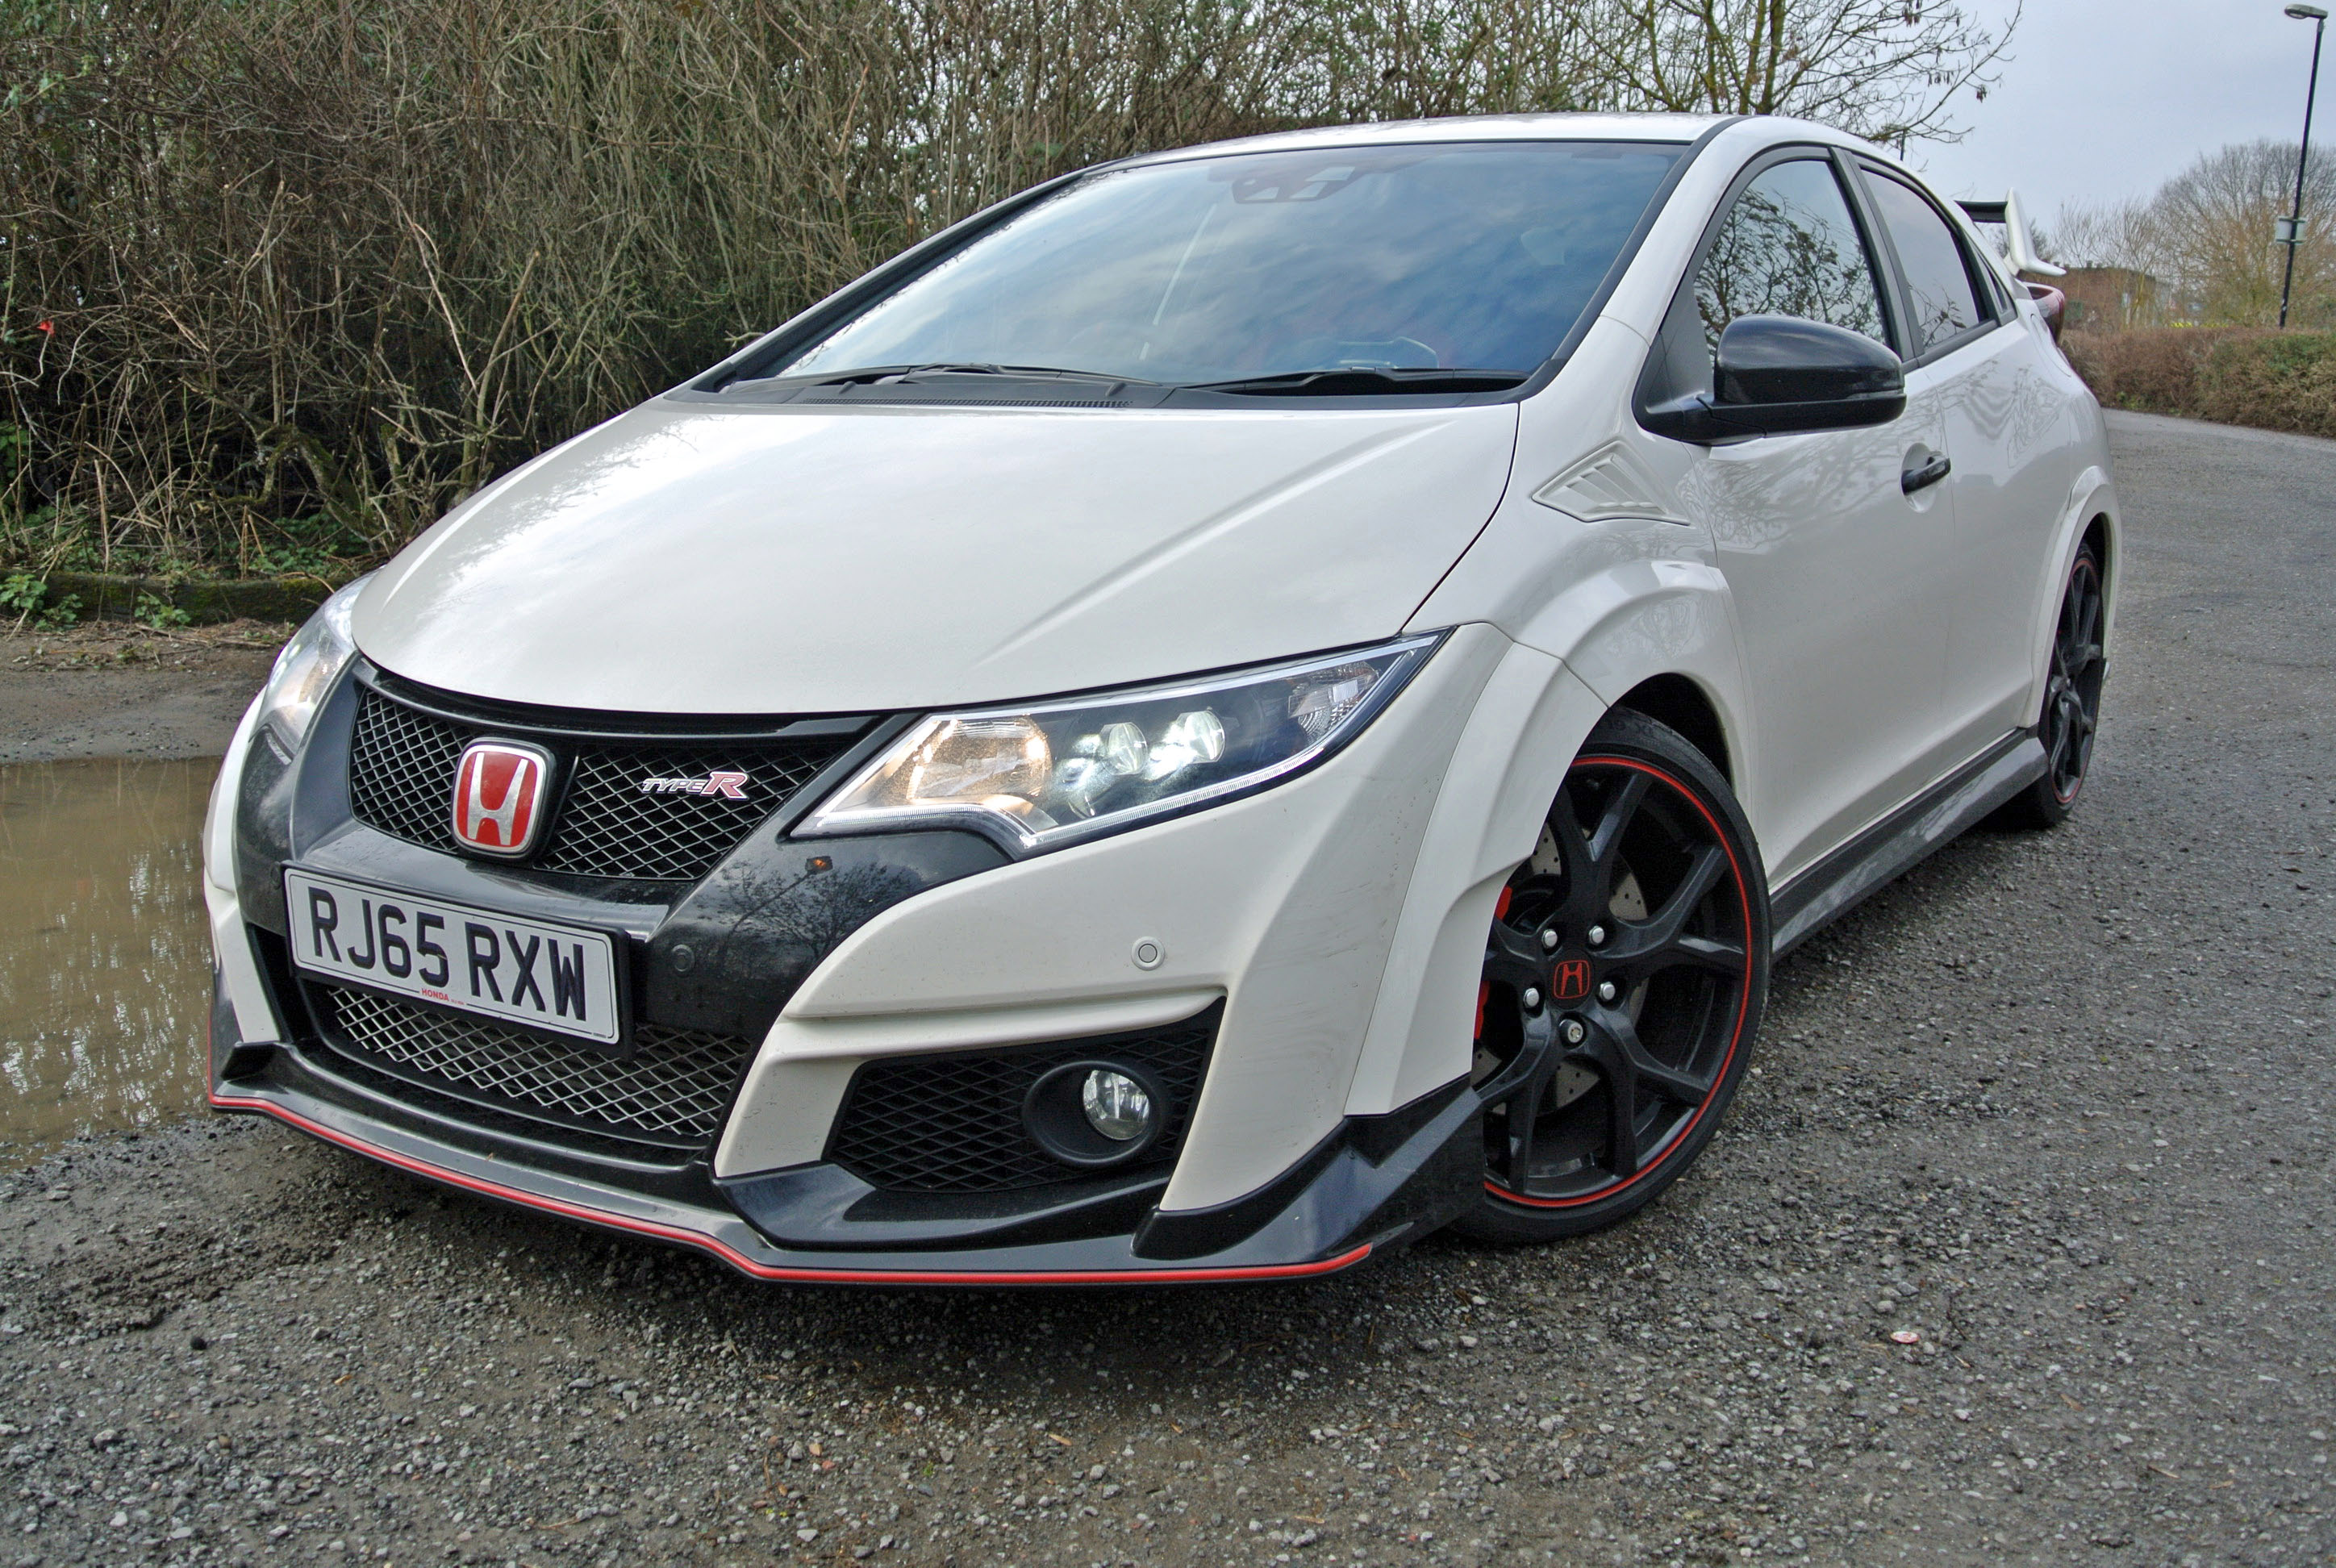 Type R gives with one hand, looks grim on the other